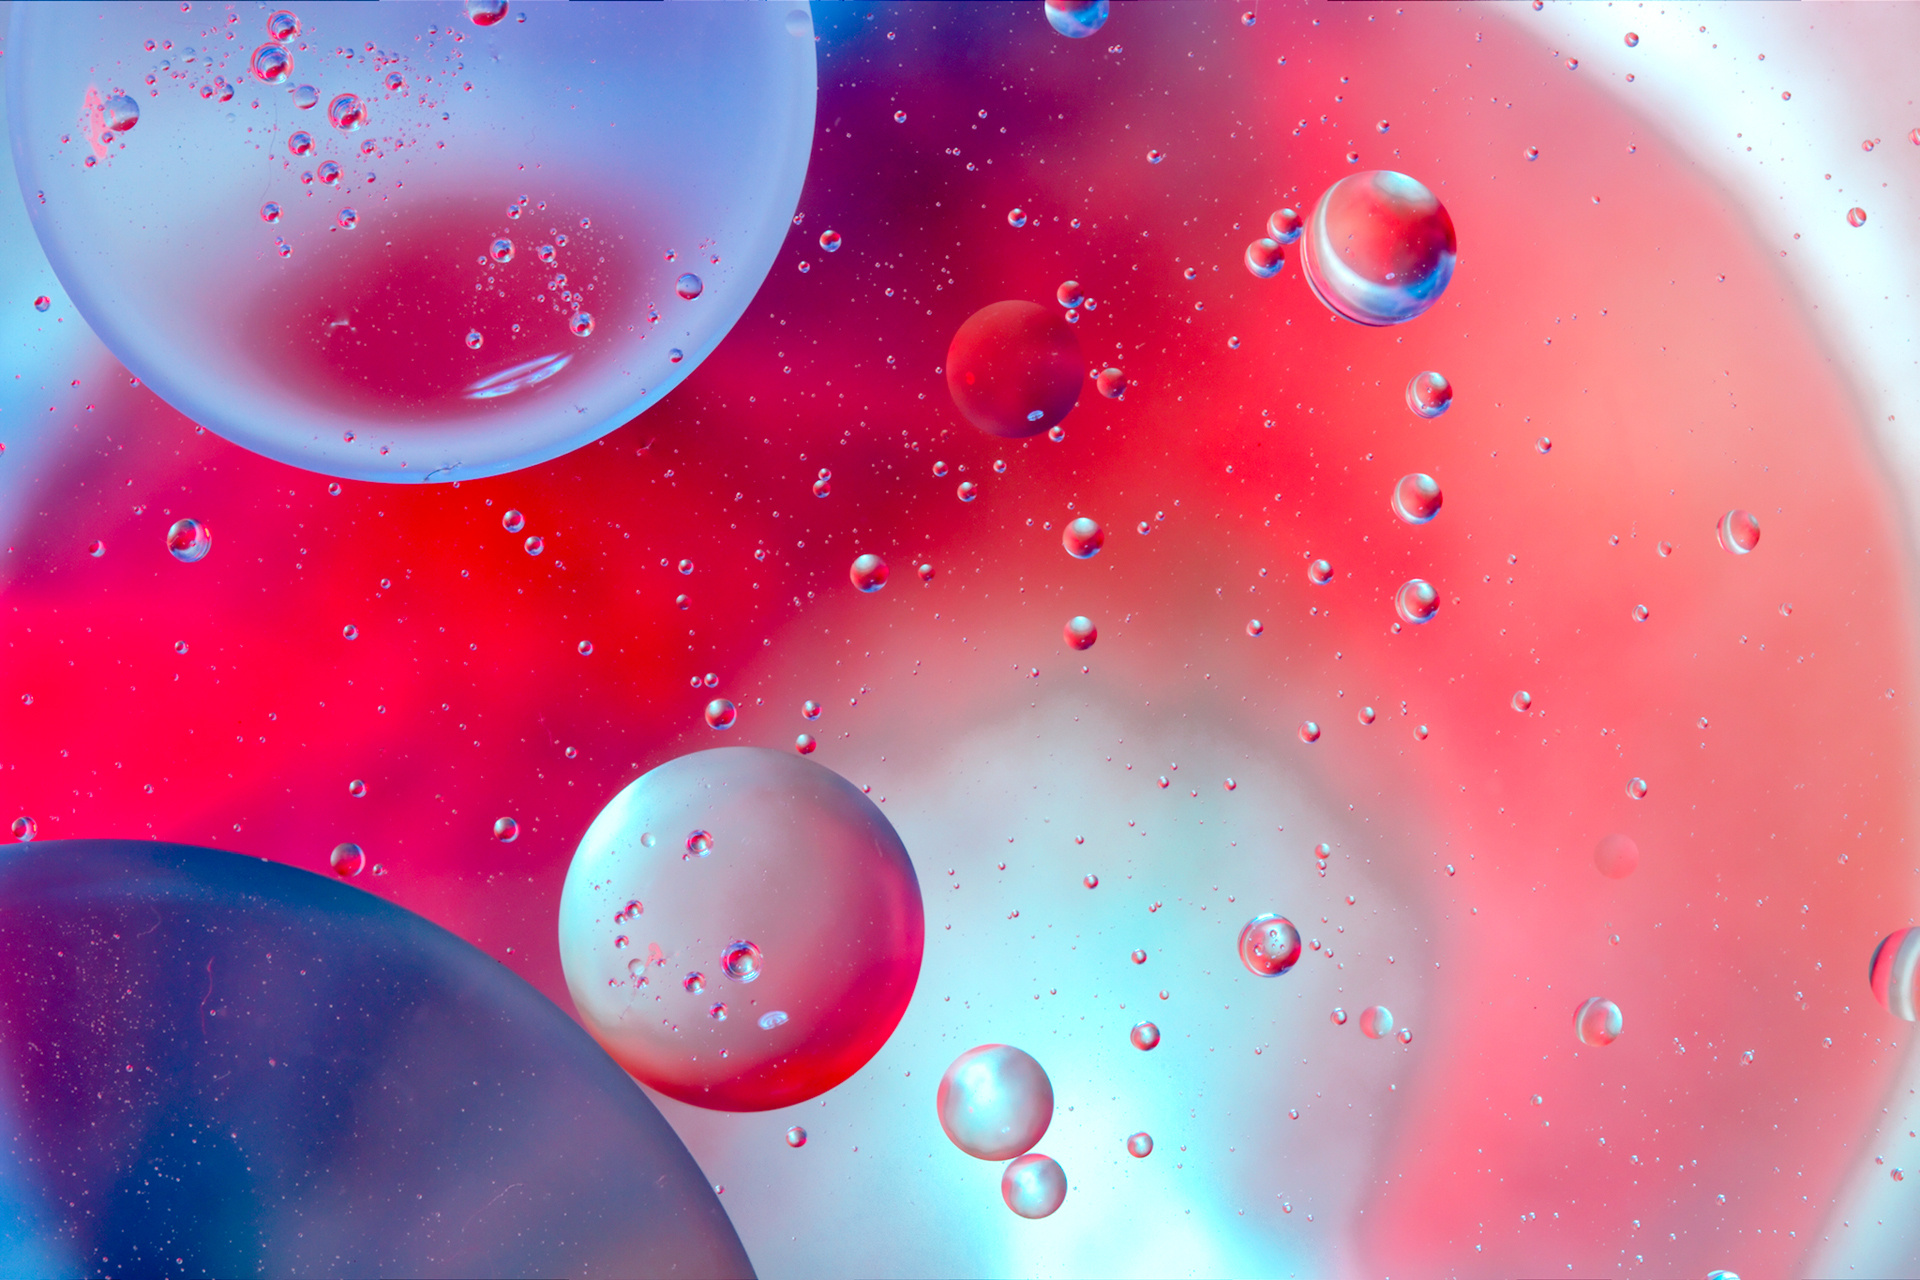 118594 download wallpaper drops, bubbles, texture, textures, surface, matt, mat screensavers and pictures for free